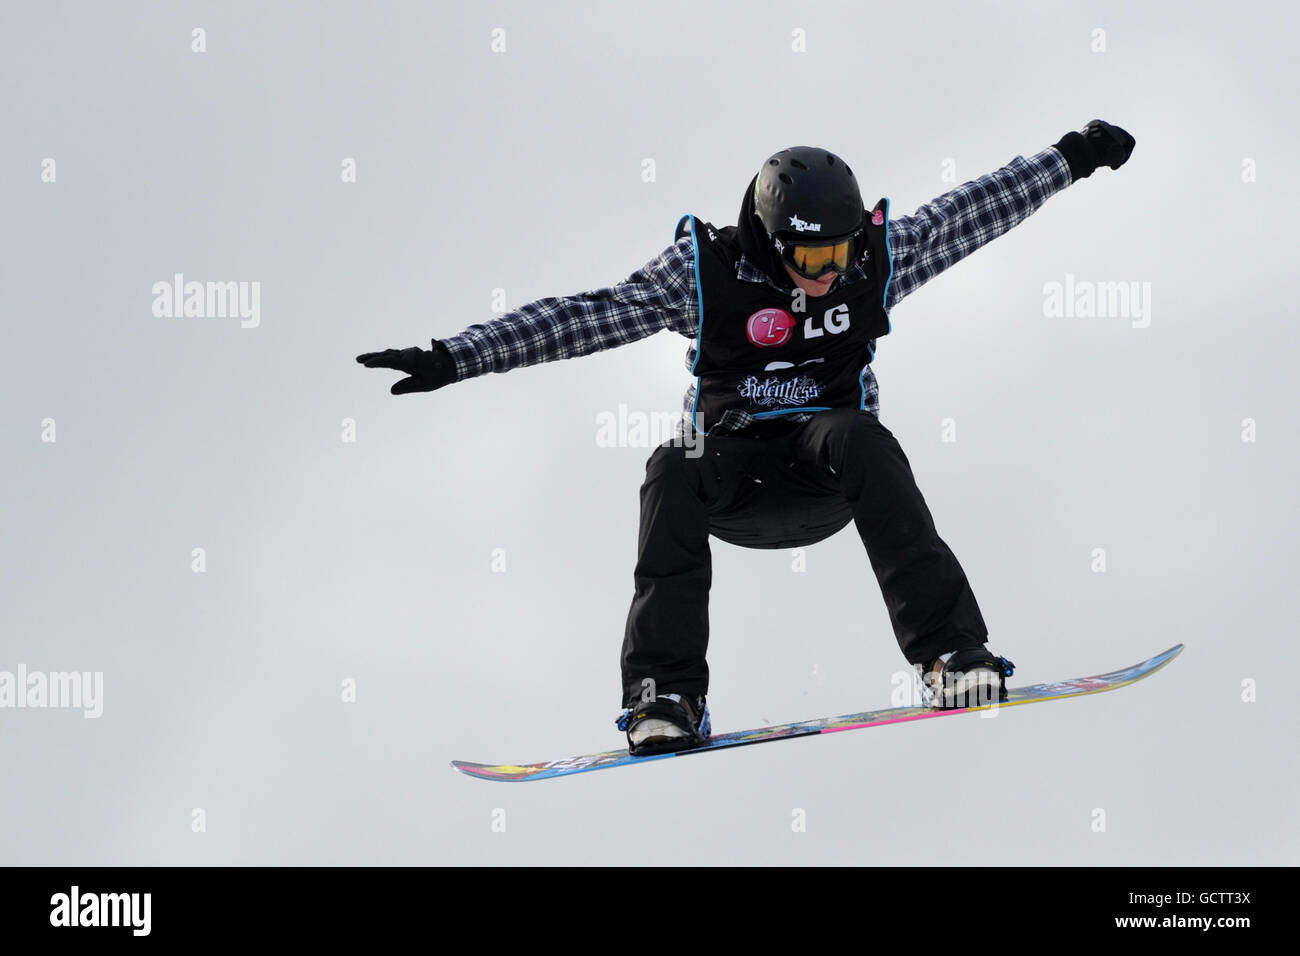 Ziga Erlac of Slovenia during the LG Snowboard FIS World Cup in London Stock Photo